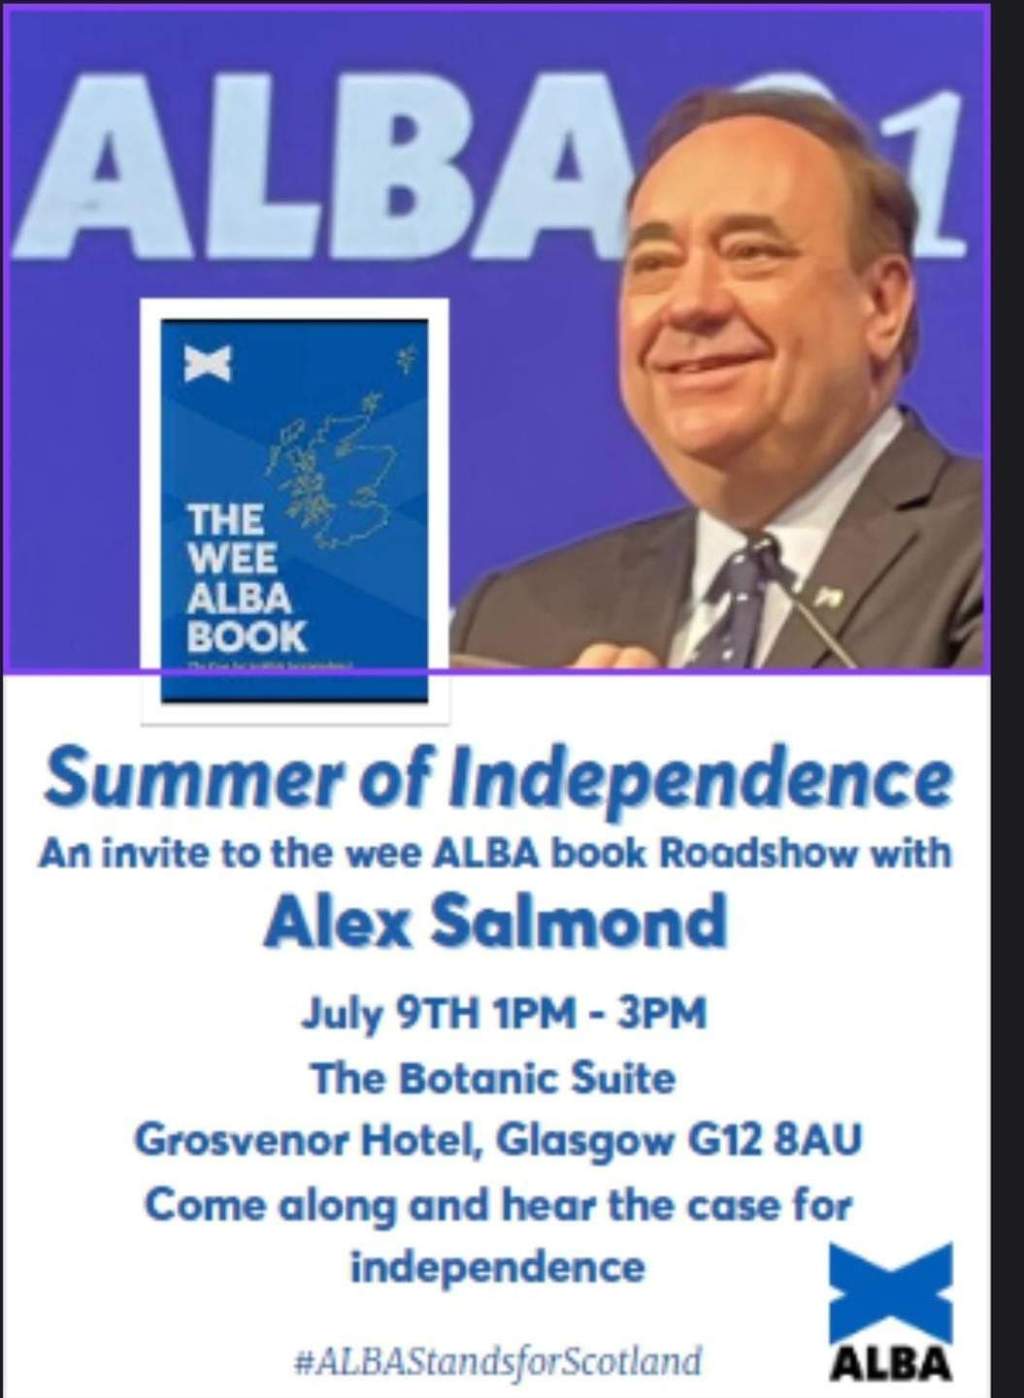 JOHNSON IS A NASTY, LYING RODENT BUT THE TORIES ARE THE REAL PROBLEM – JOIN ALEX SALMOND AND I ON SATURDAY TO STAND UP FOR SCOTLAND’S INDEPENDENCE